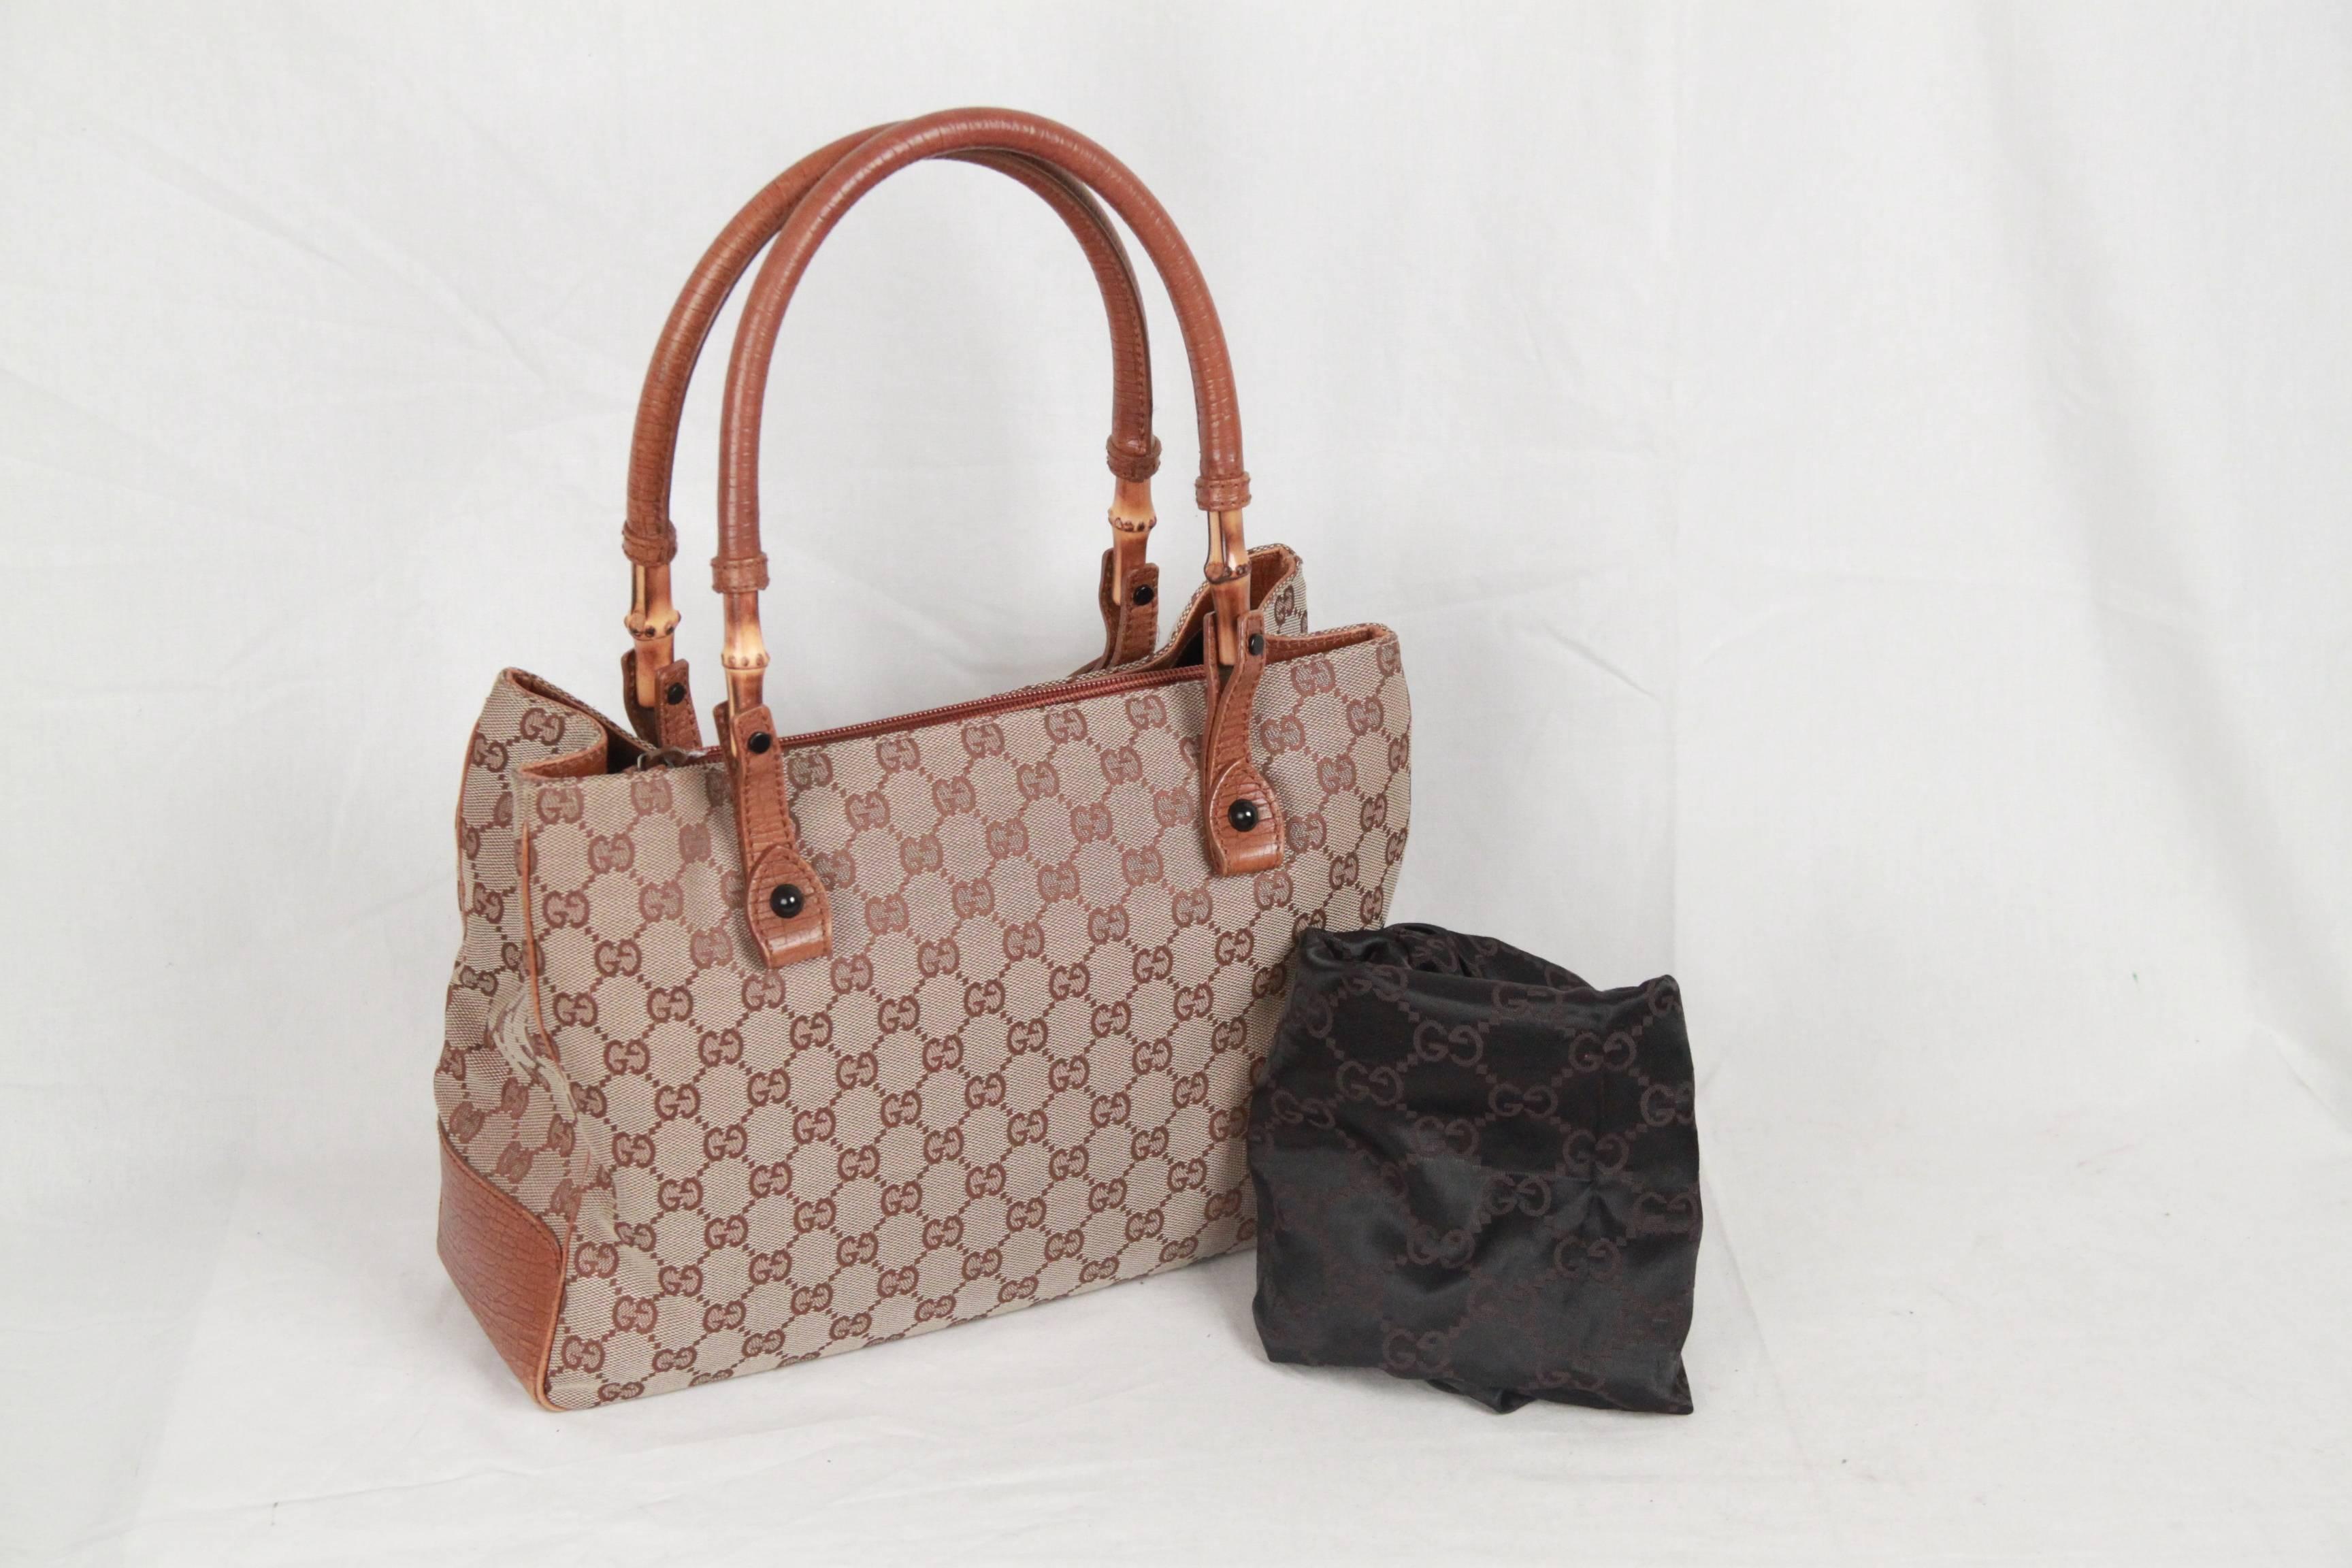 GUCCI Beige Monogram Canvas TOTE Bag w/ BAMBOO Detail 6